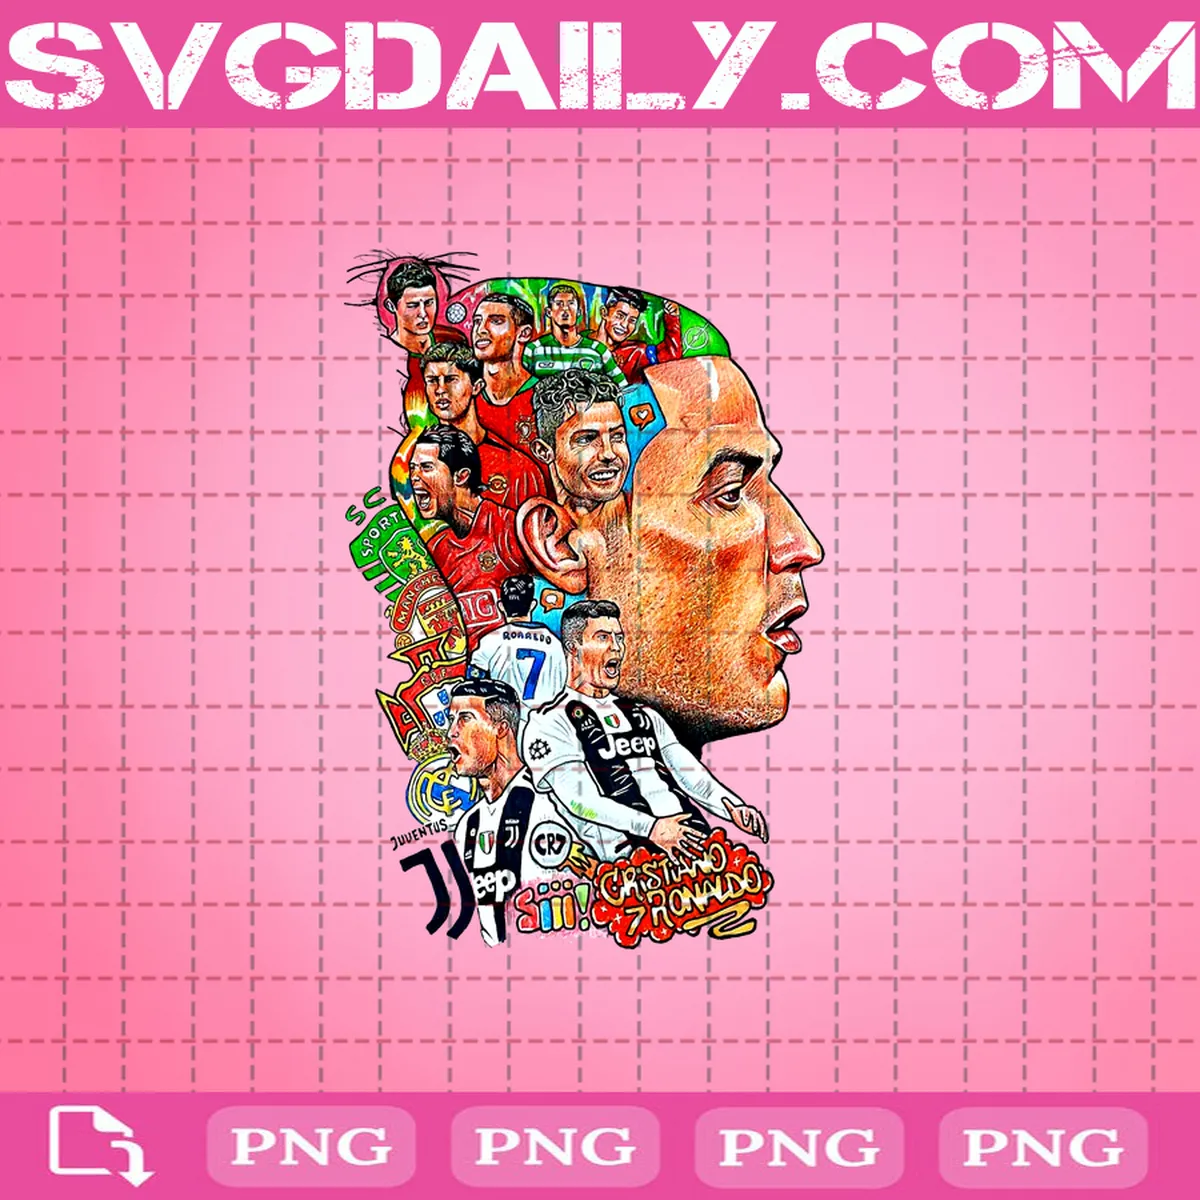 Cristiano Ronaldo Png, CR7 Png, Football Png, Portugal Football Png, Cristiano Ronaldo Football Player Png, Soccer Star Png